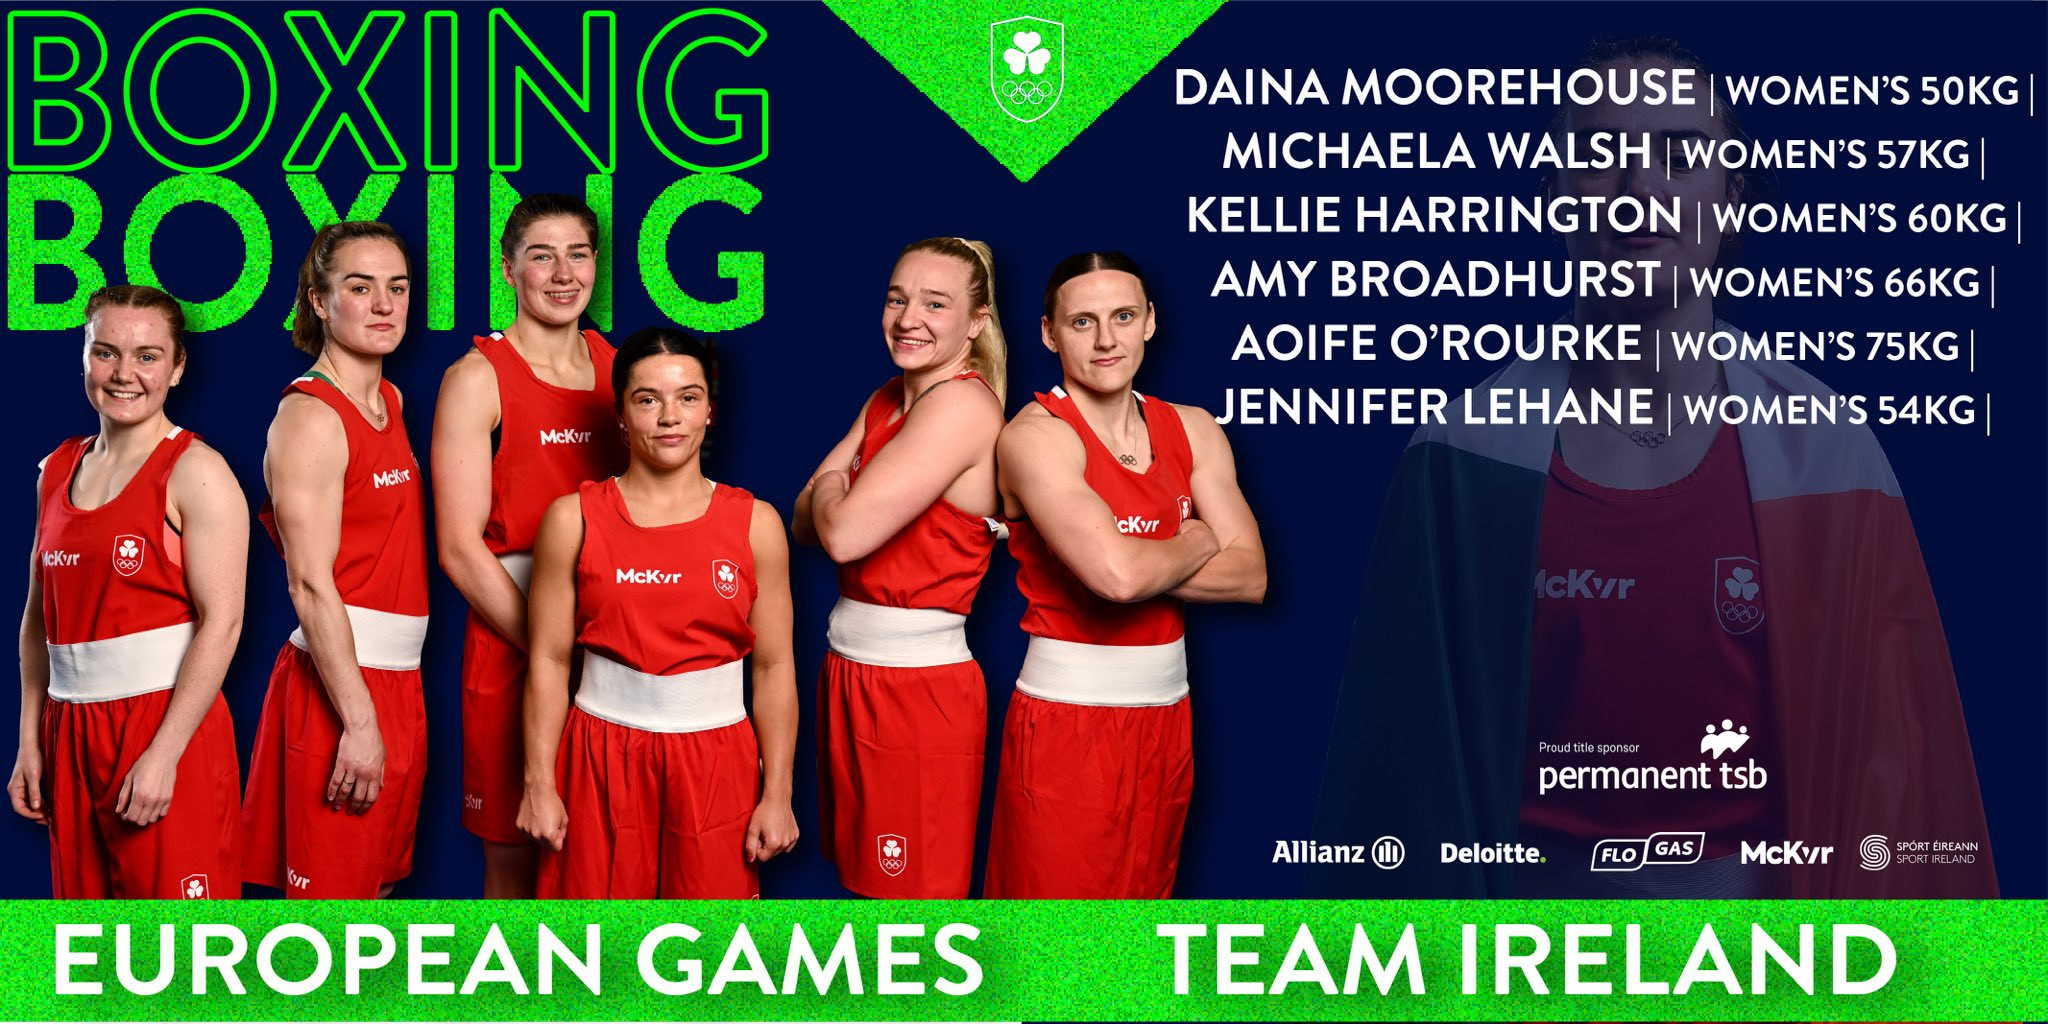 Olympic gold medallist Kellie Harrington is among the boxers selected for Ireland at the European Games ©Olympic Federation of Ireland